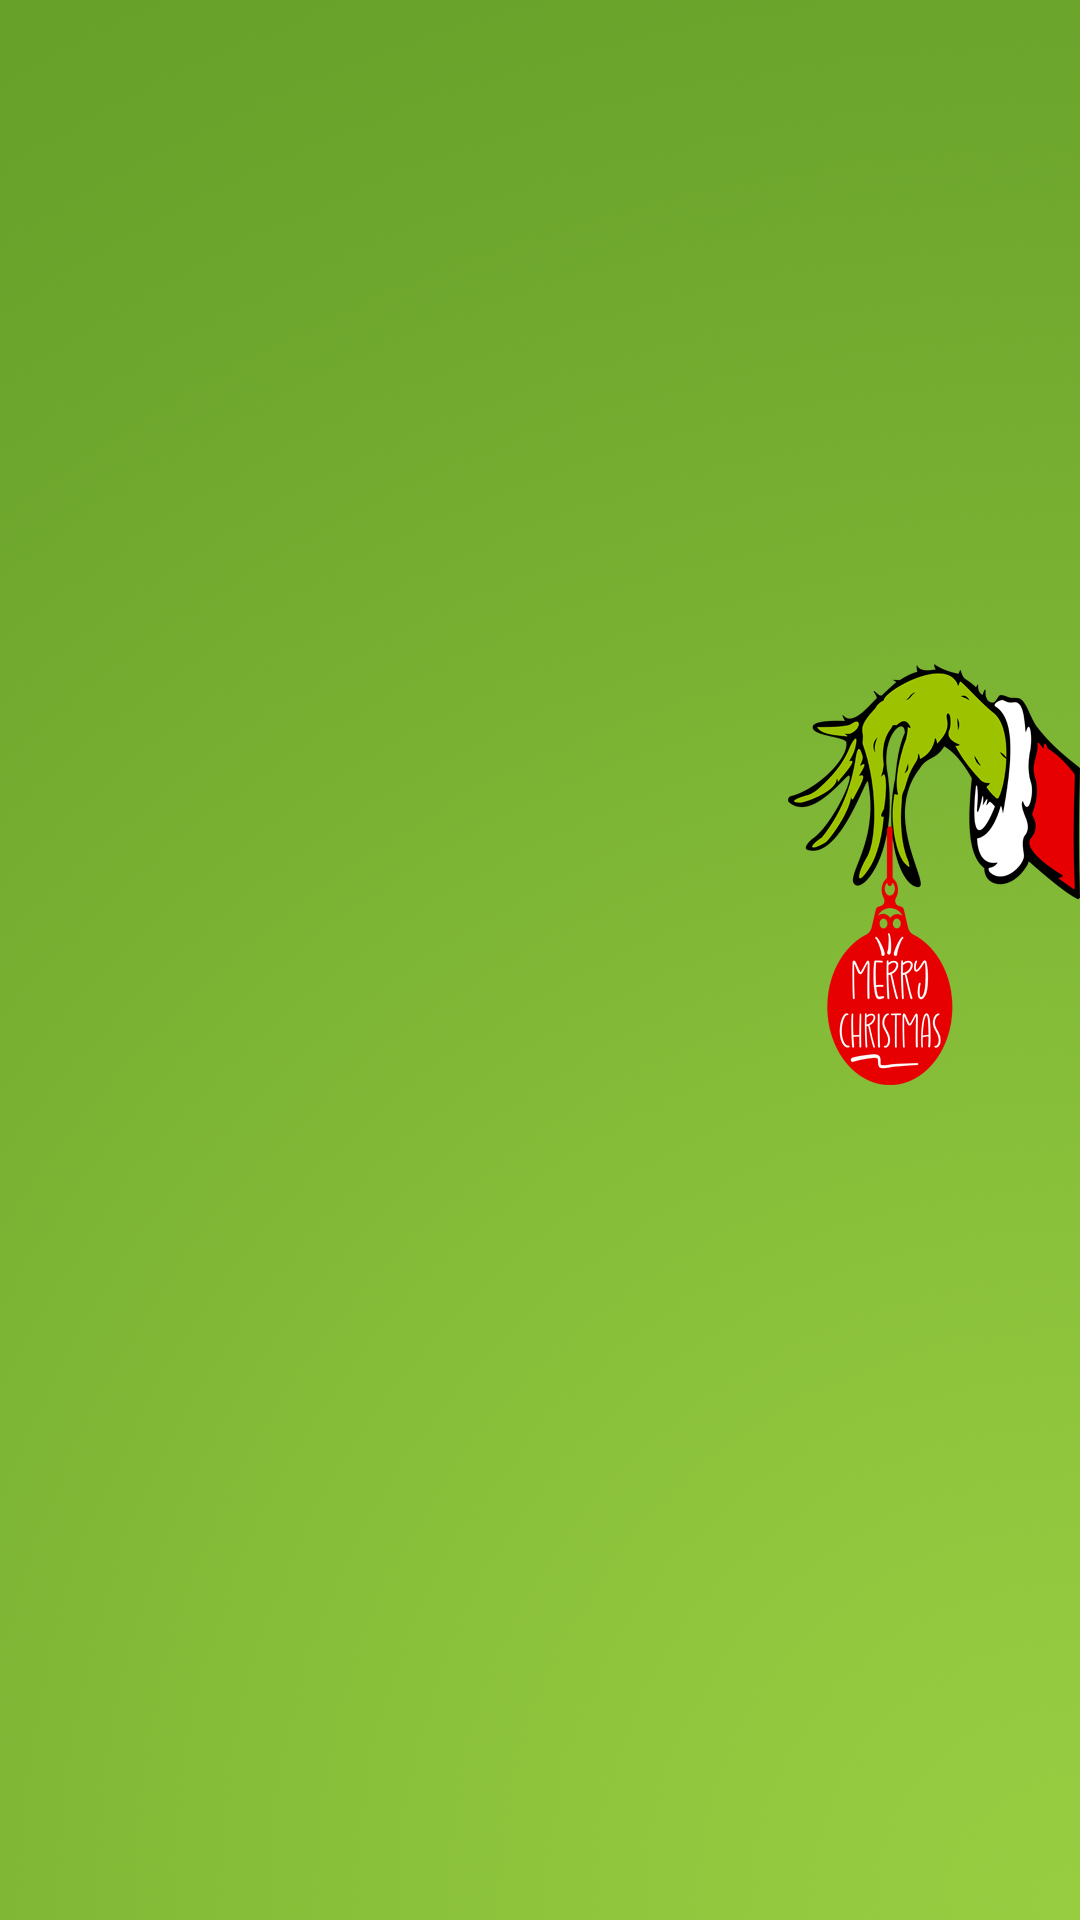 The Grinch  How The Grinch Stole Christmas Wallpaper 33148444  Fanpop